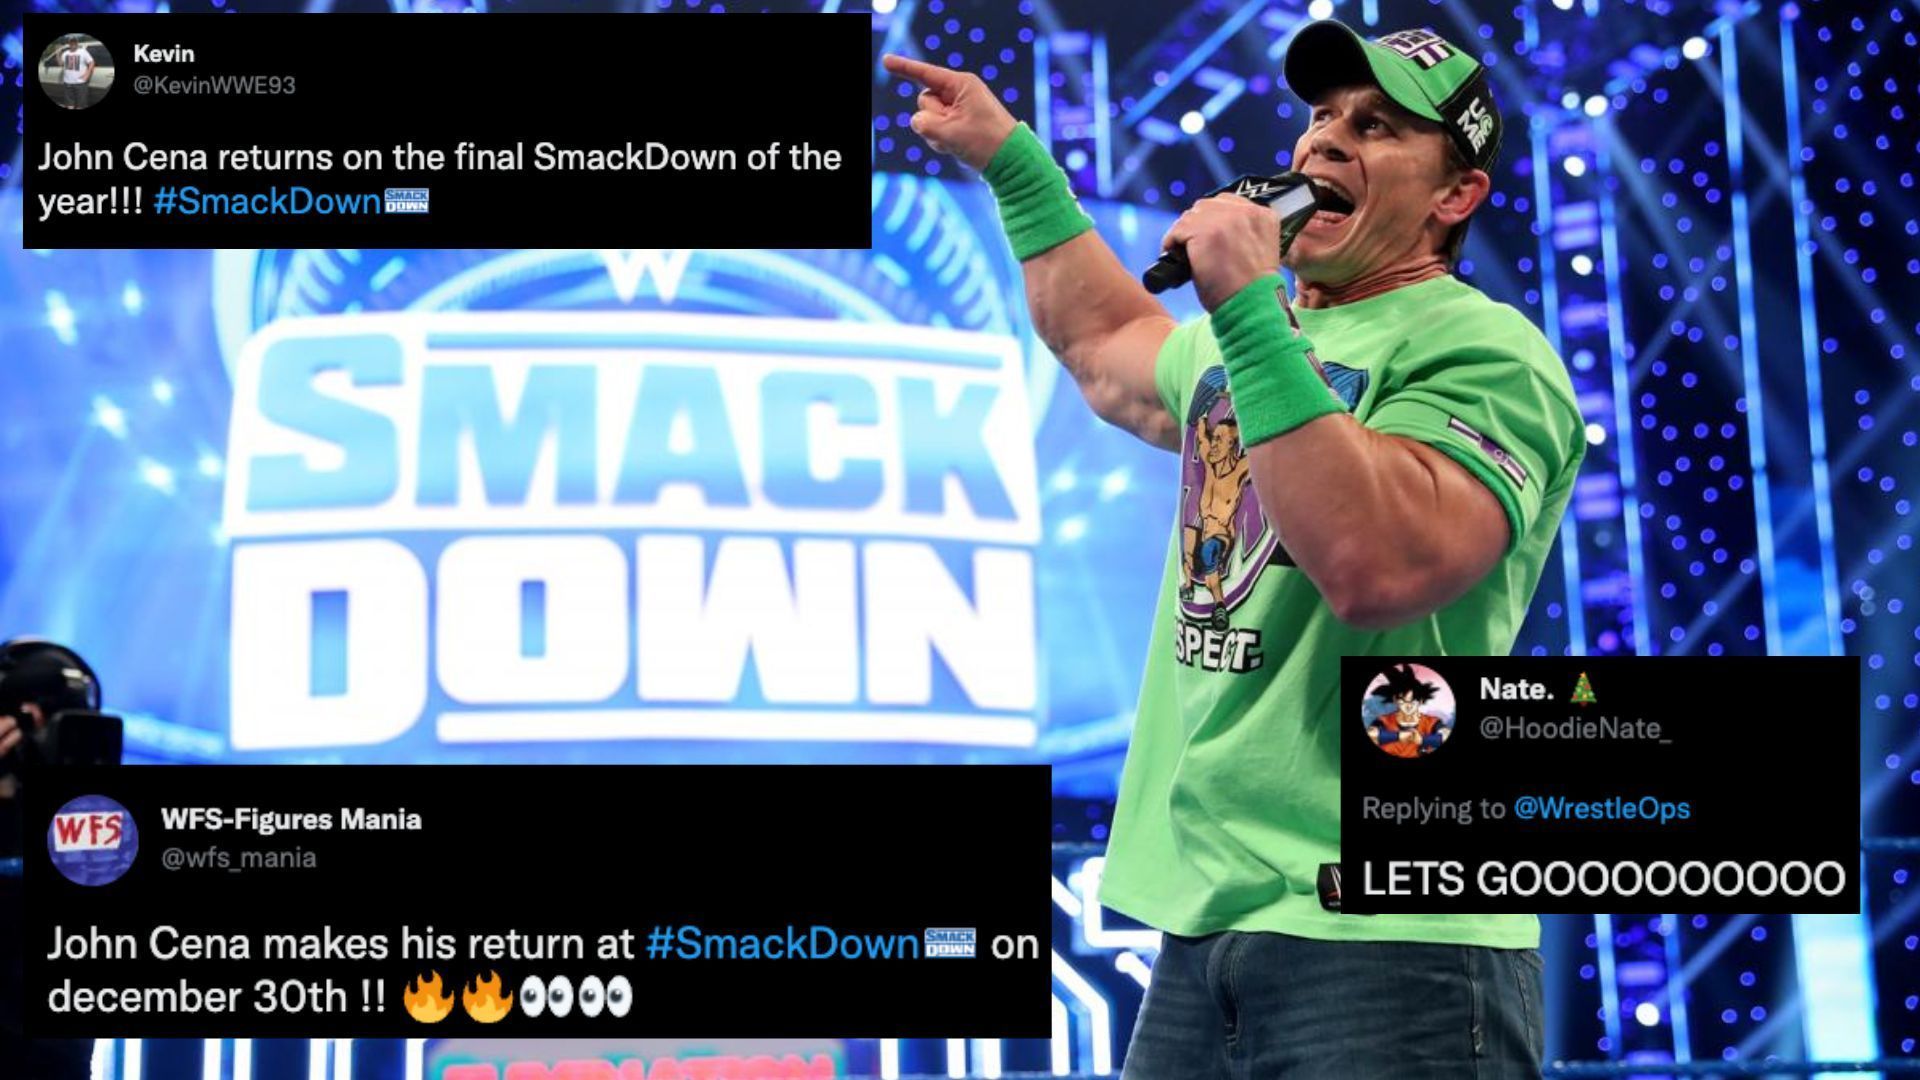 John Cena will return to WWE SmackDown later this month